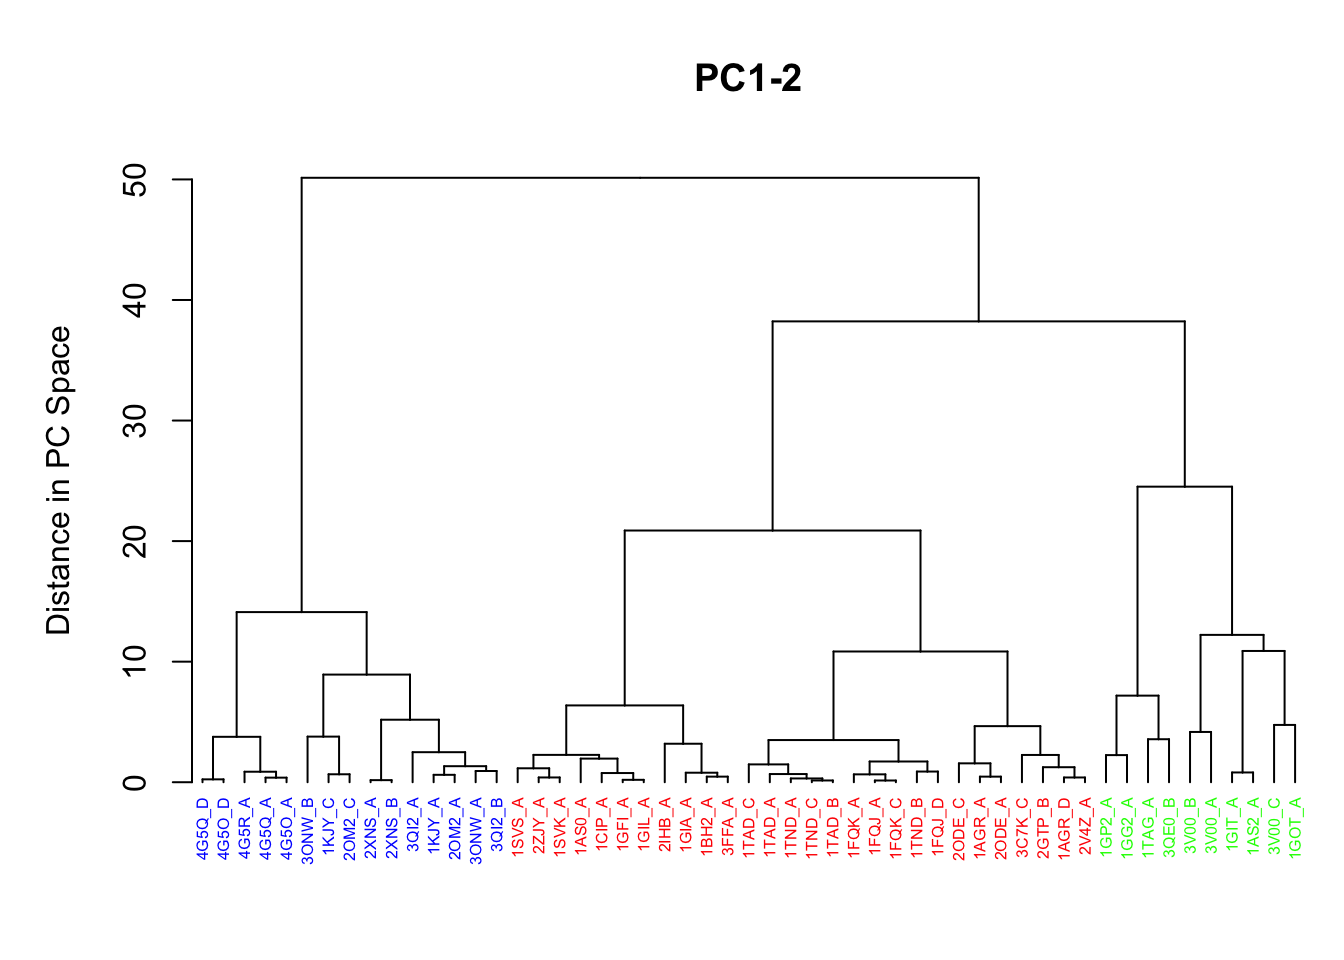 Clustering based on PC1-PC2